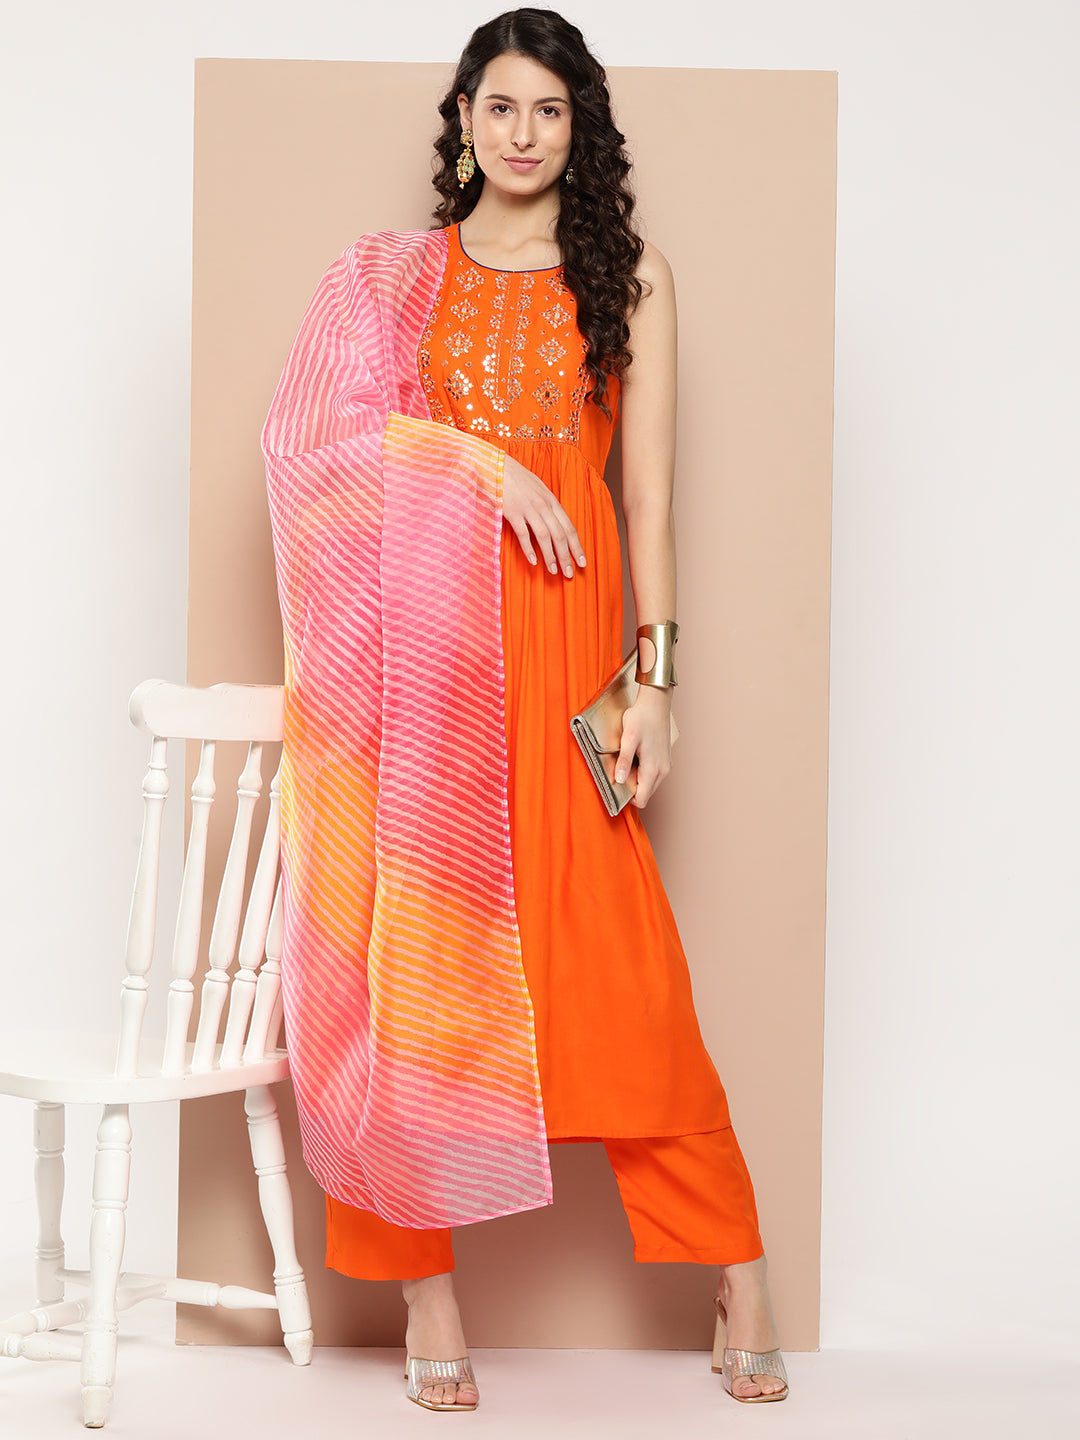 Share more than 212 pink and orange kurti best